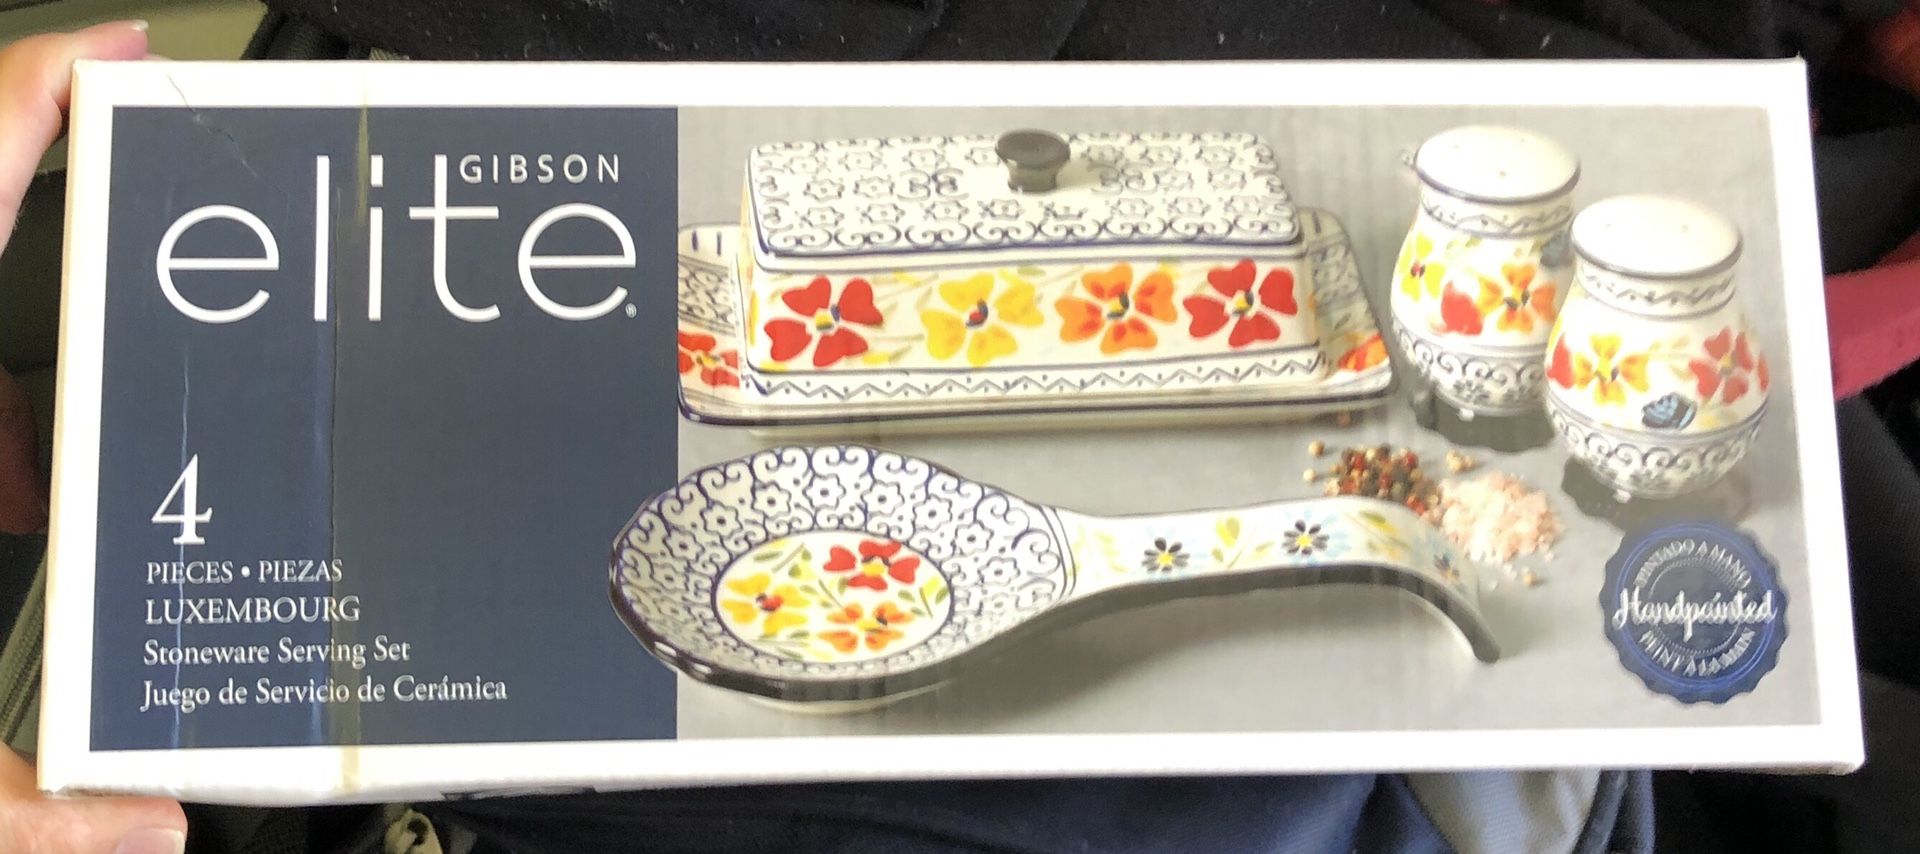 GIBSON LUXEMBOURG STONEWARE SERVING SET